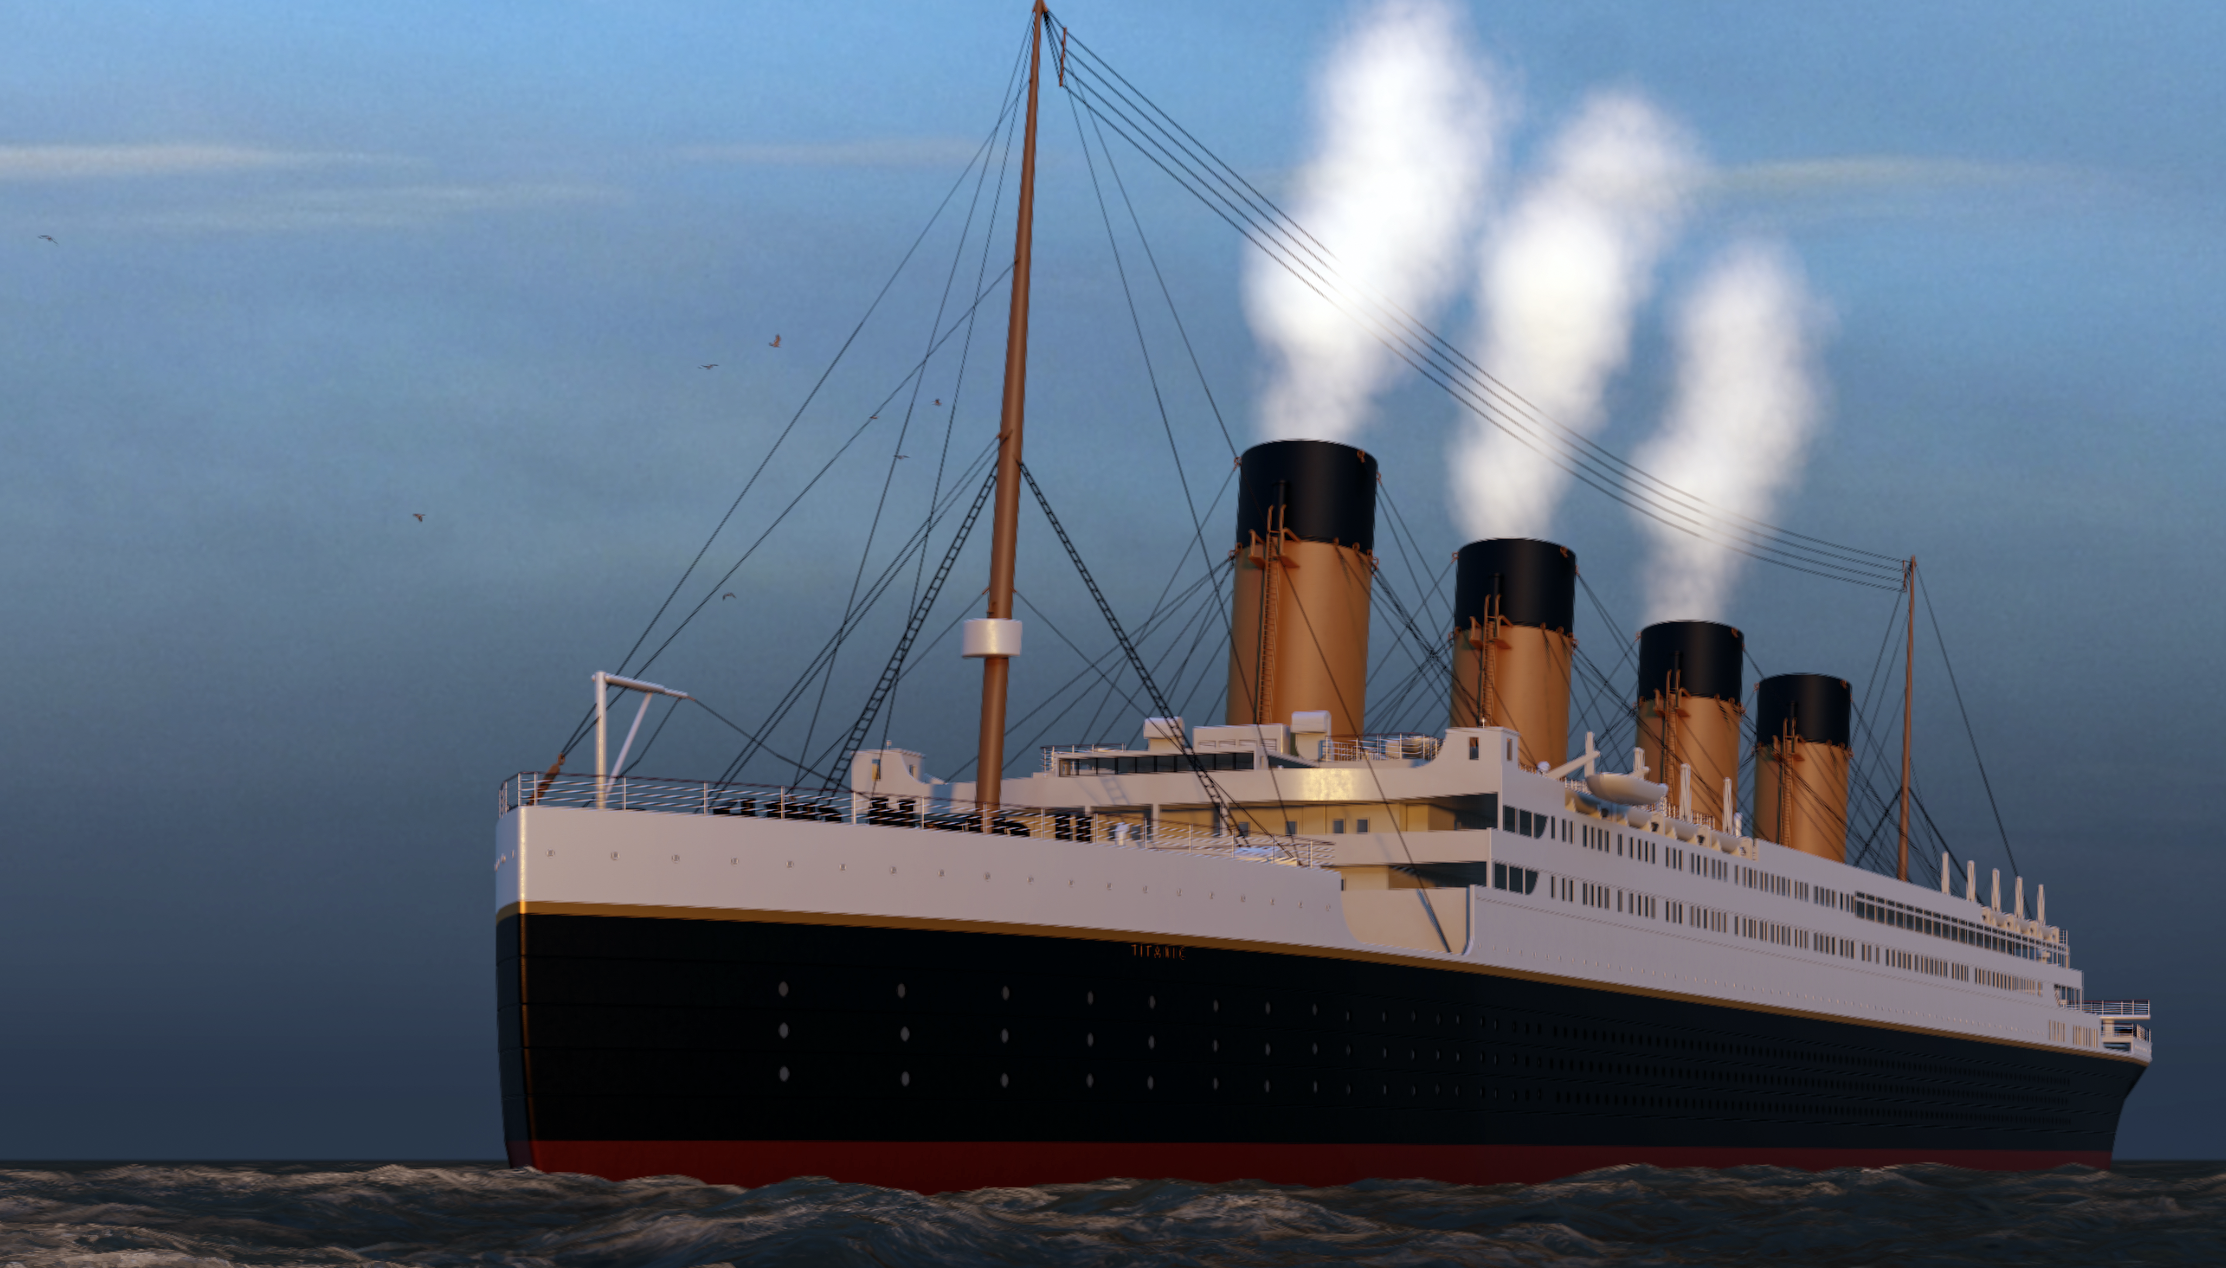 A Titanic exhibit is opening in NYC this fall